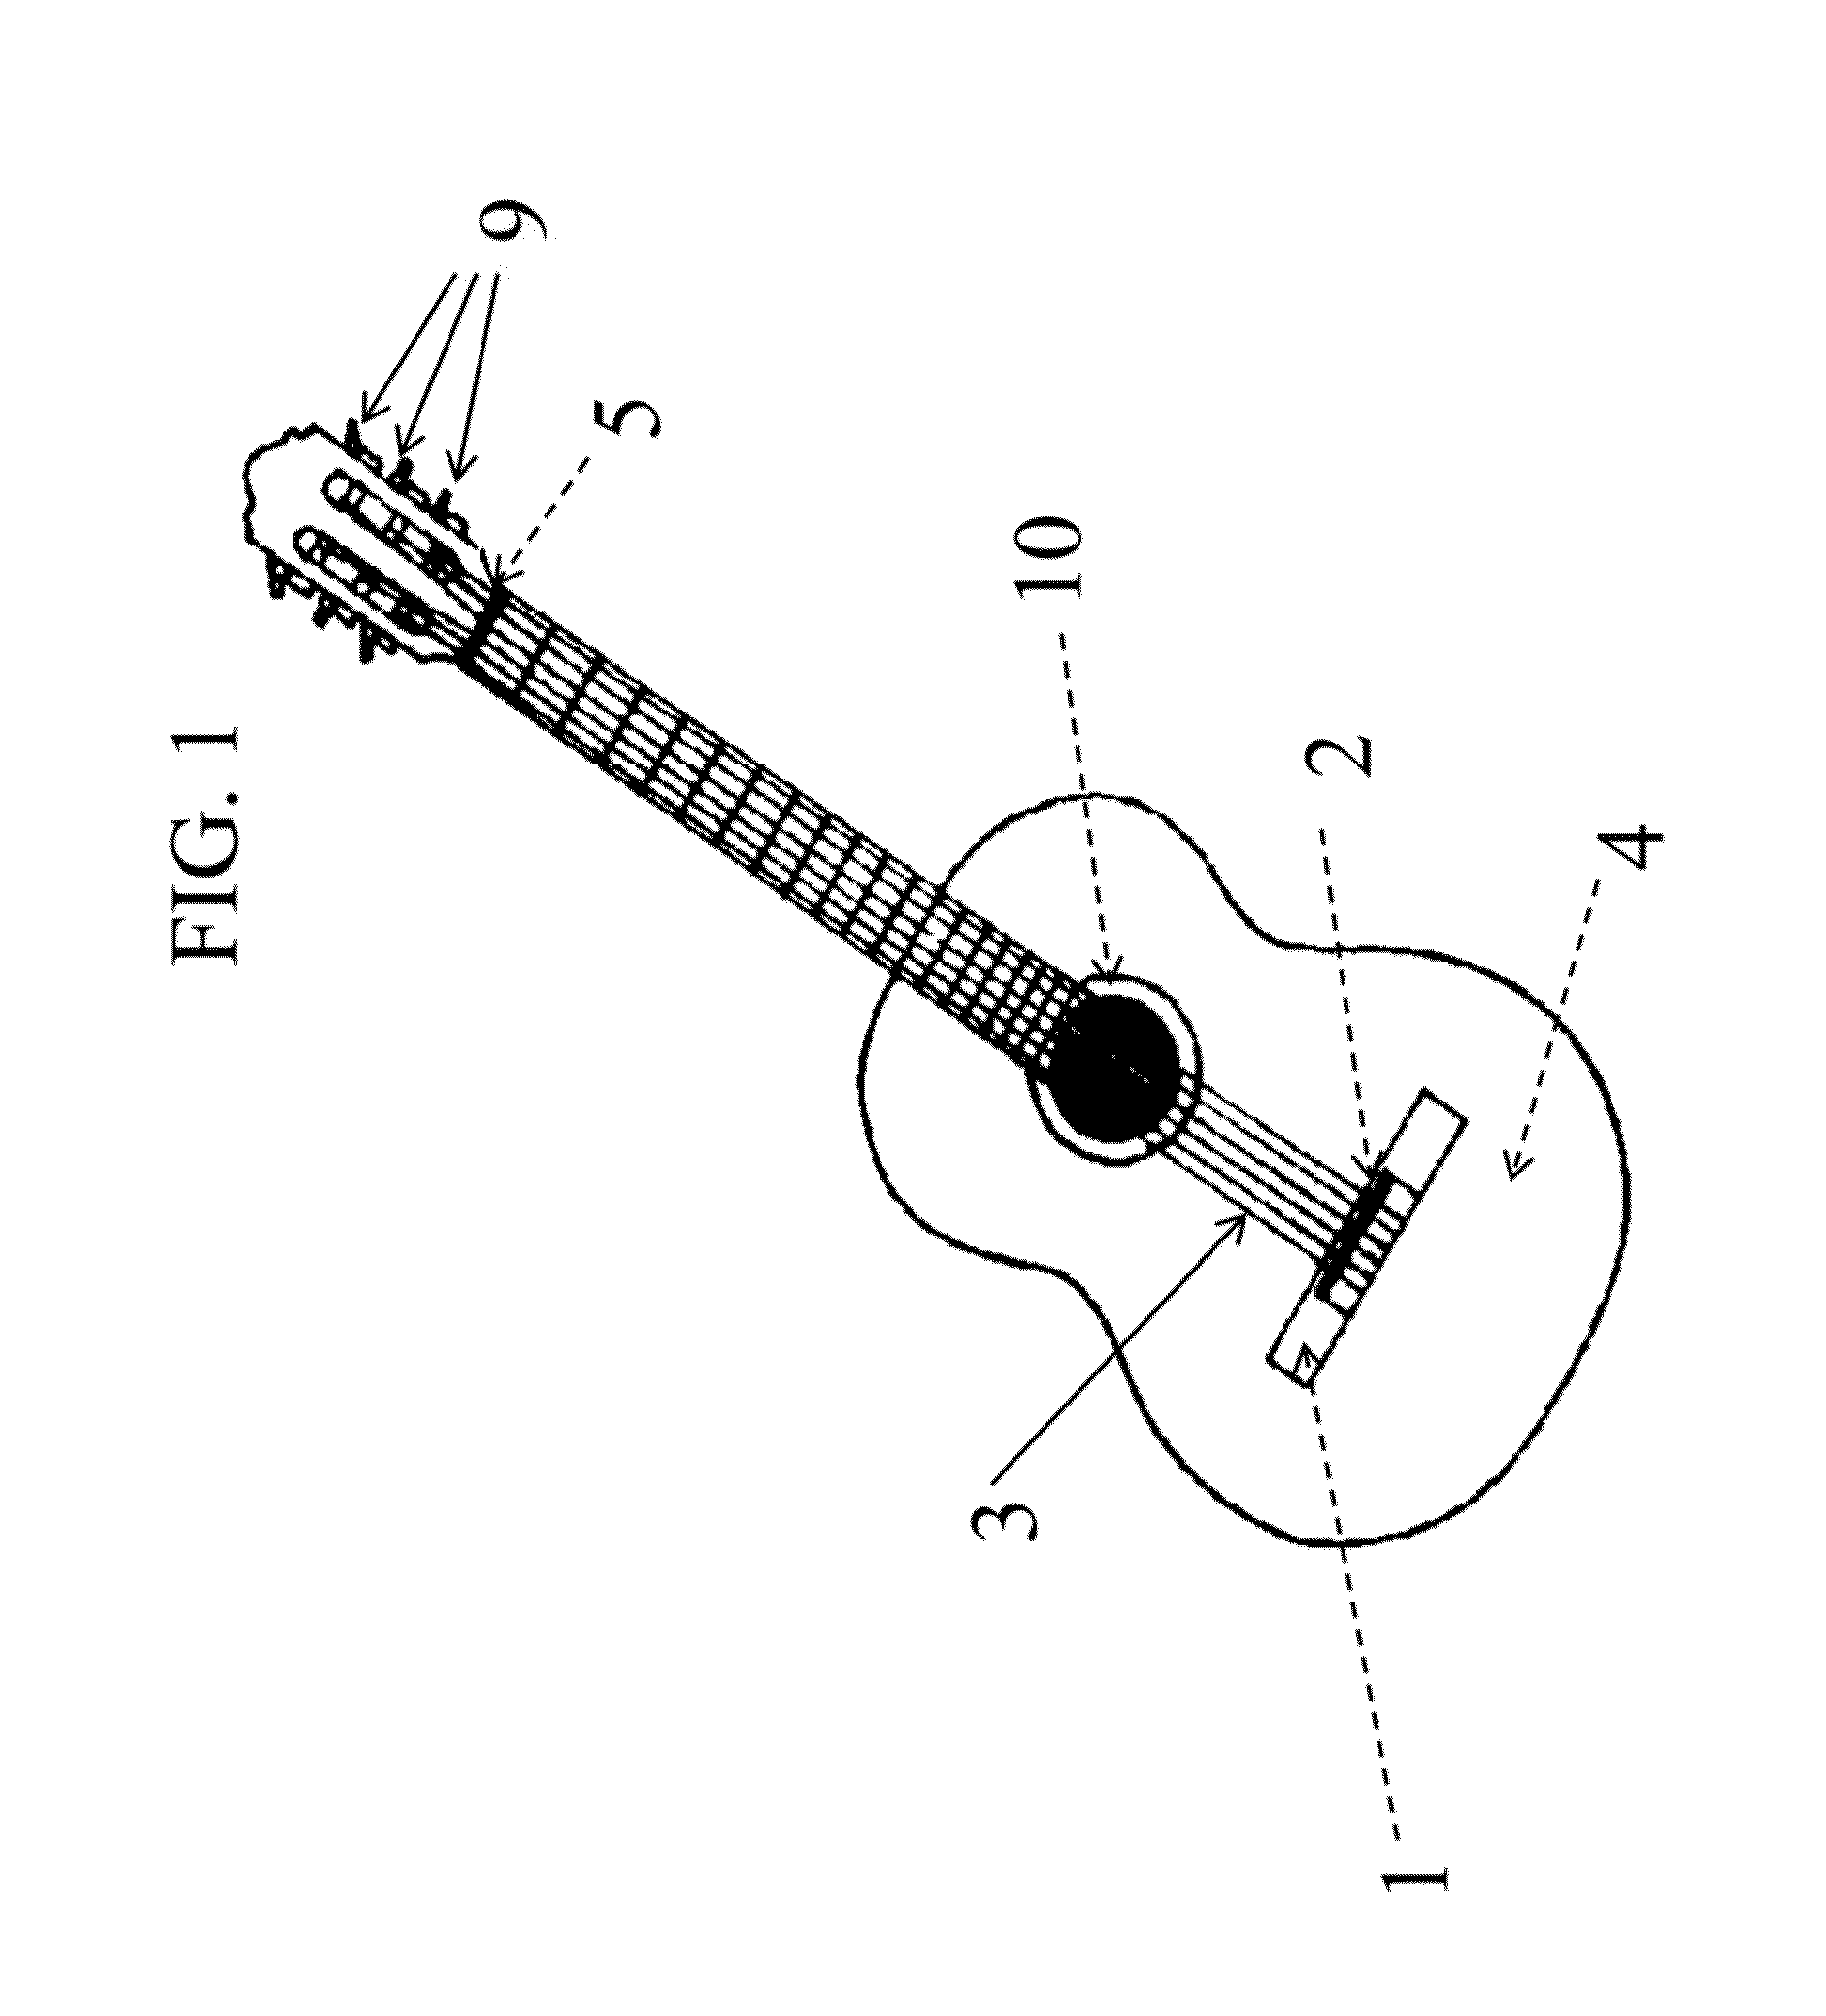 Sympathetic parallel plate resonator for acoustic instruments